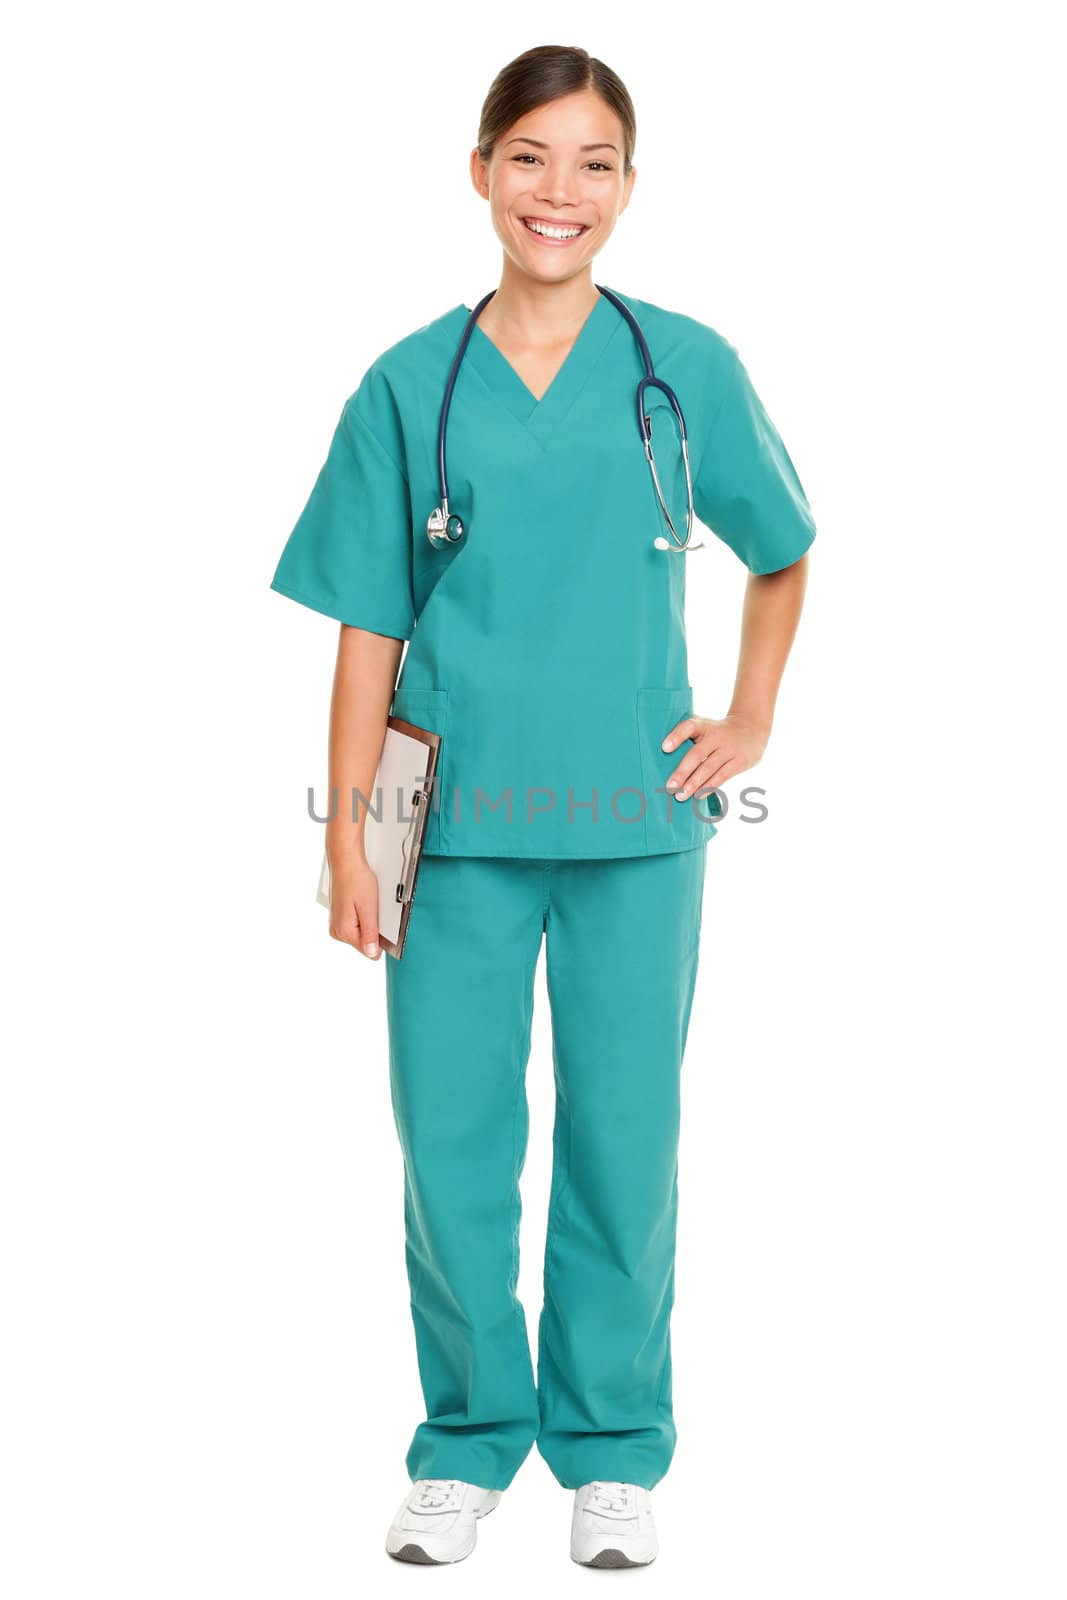 Nurse or young doctor standing smiling isolated on white background in full body. Woman medical professional in green scrubs smiling happy. Mixed race ethnic Chinese Asian and Caucasian female model.